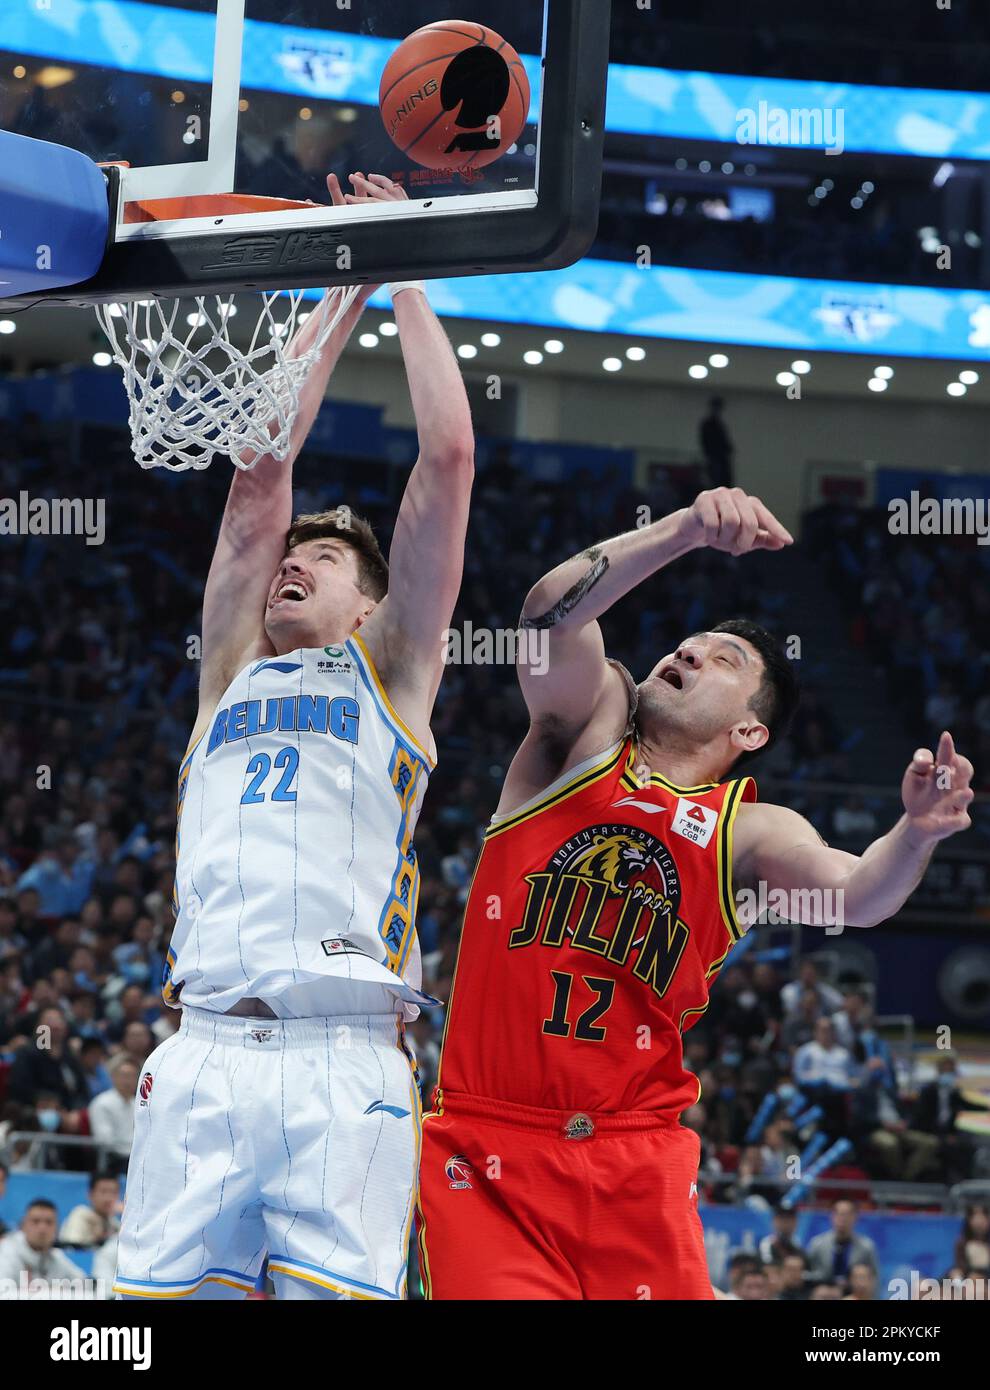 Beijing, China. 10th Apr, 2023. Ty Jacob Leaf (L) of Beijing Ducks vies for the ball during the playoff 1st round match between Beijing Ducks and Jilin Northeast Tigers at the 2022-2023 season of the Chinese Basketball Association (CBA) league in Beijing, capital of China, April 10, 2023. Credit: Zhang Chenlin/Xinhua/Alamy Live News Stock Photo